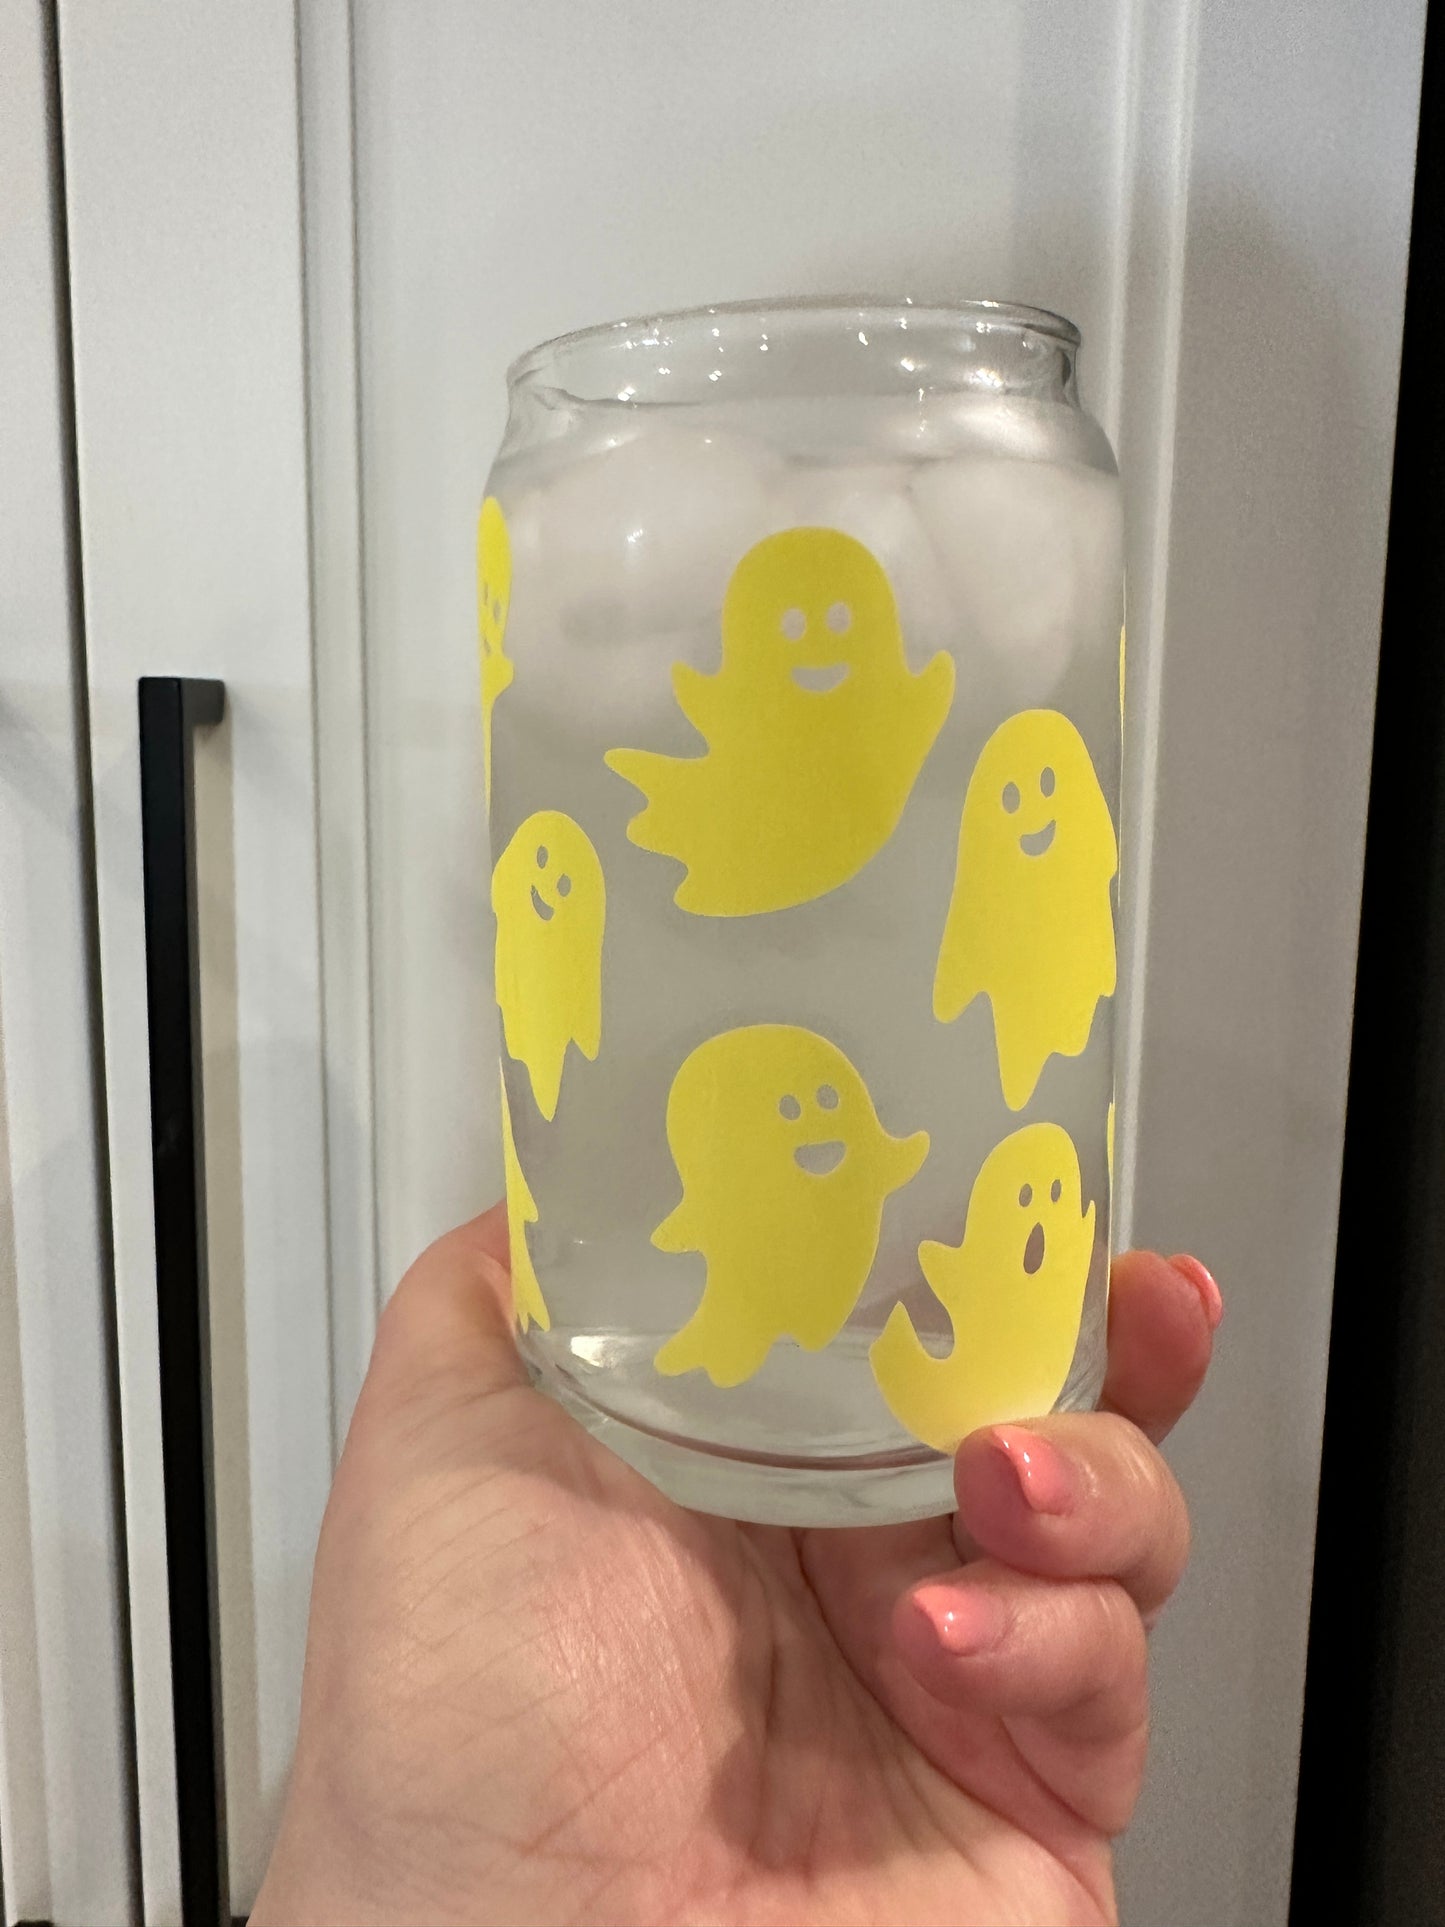 16oz Libbey Can Glass - Colour Changing Ghosts